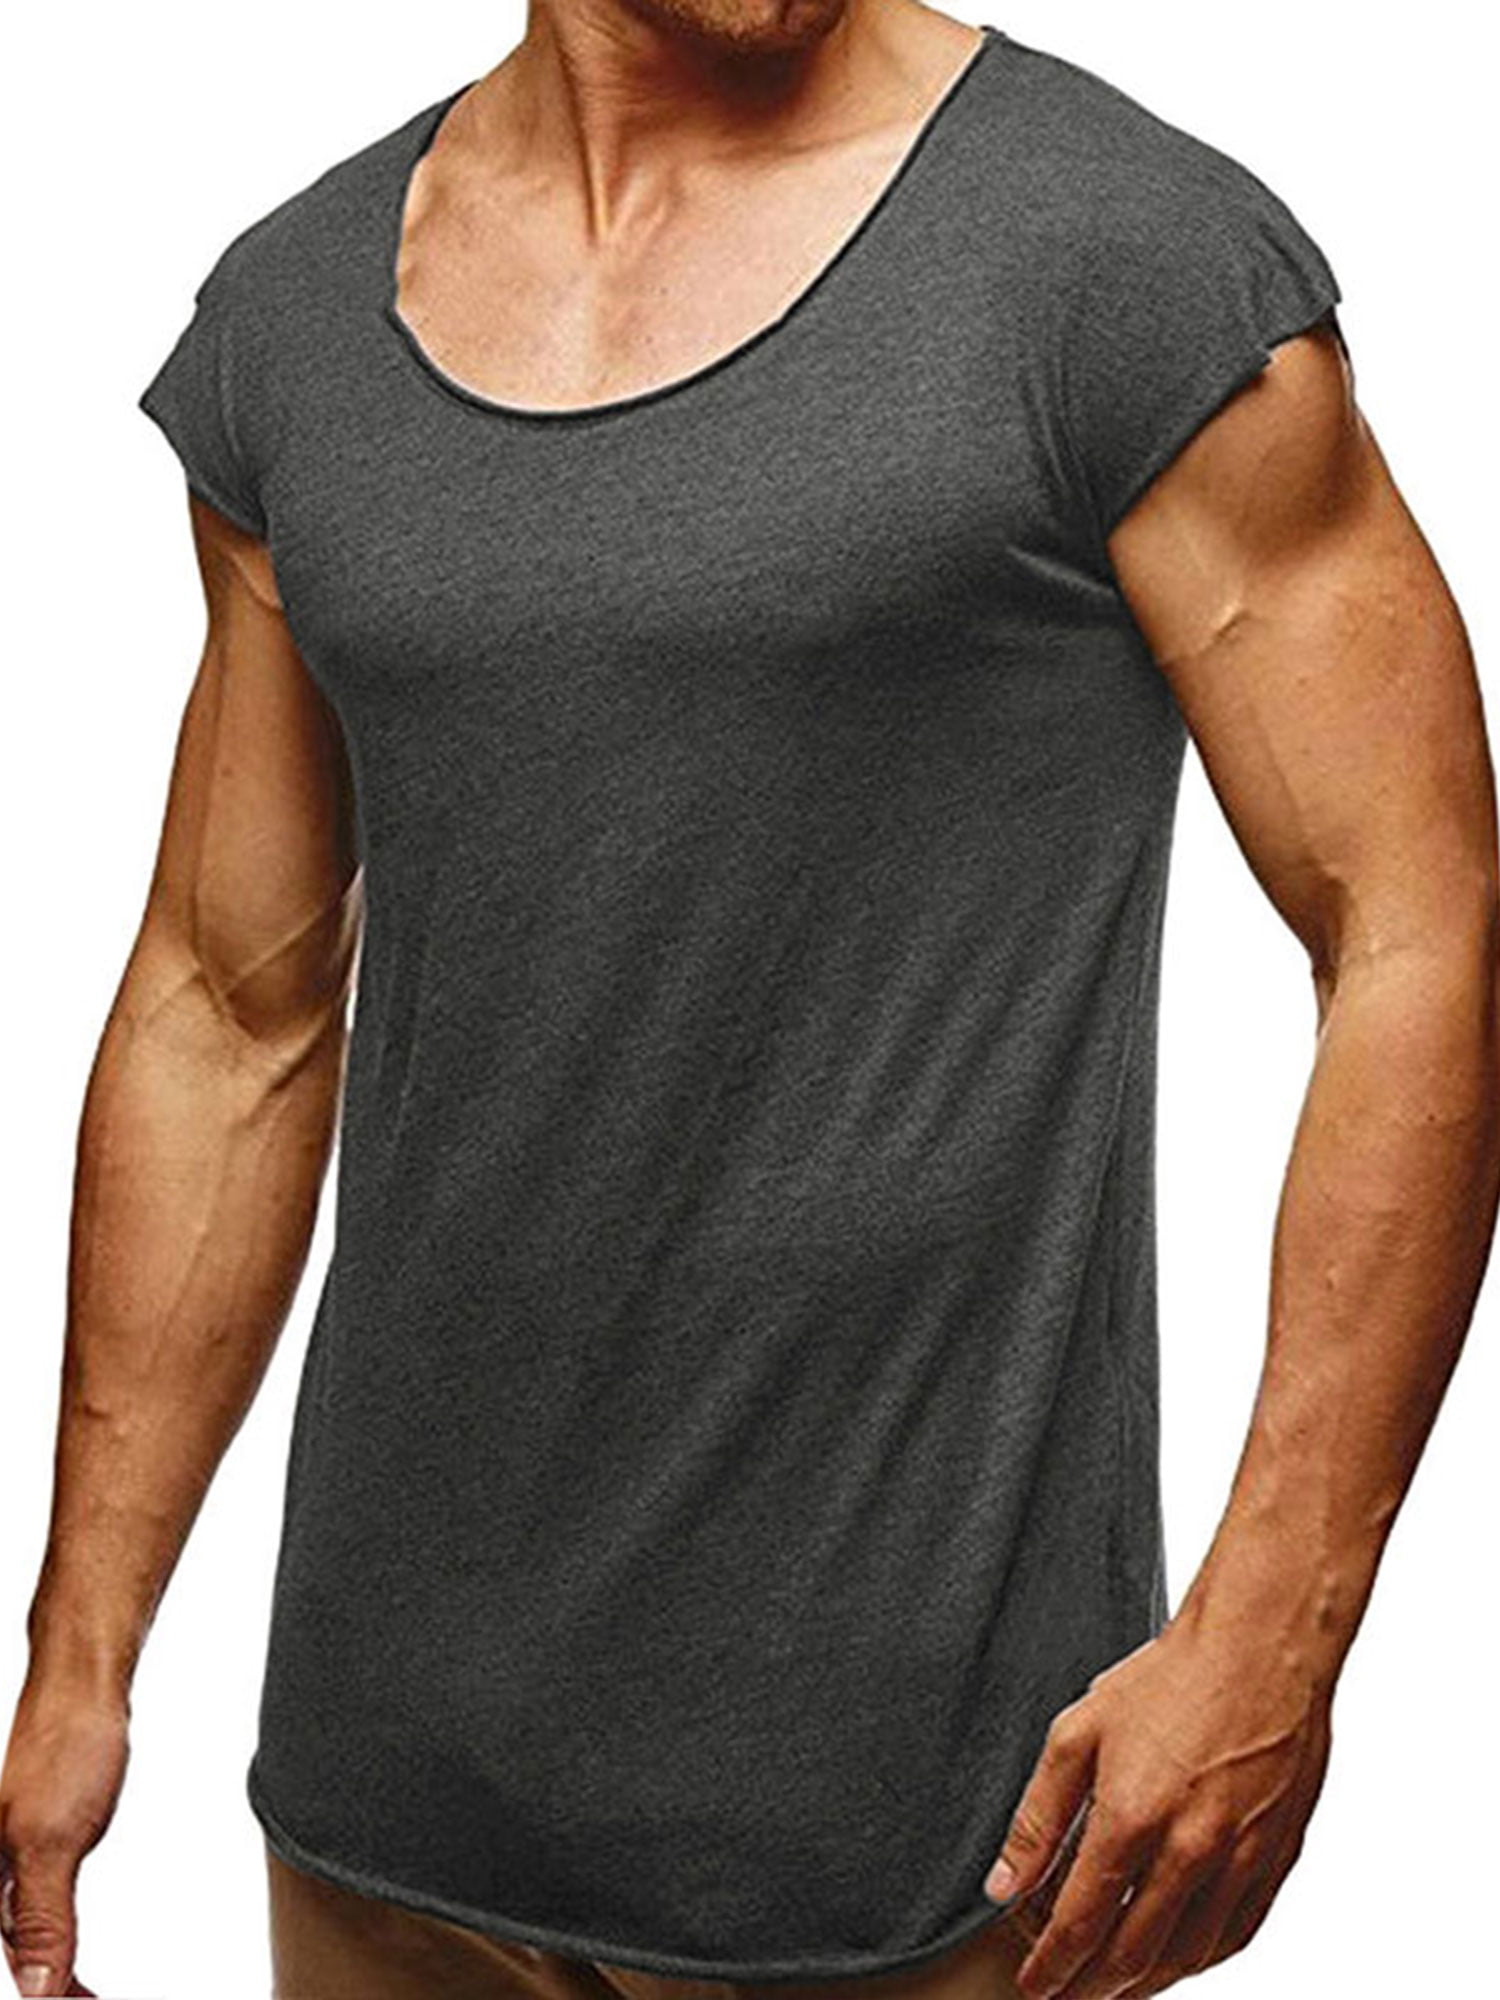 Men's Scoop Neck T Shirts Short Sleeve Muscle Cut Tee Tops for Athletic Gym Workout Bodybuilding Build 100% Washed Cotton 